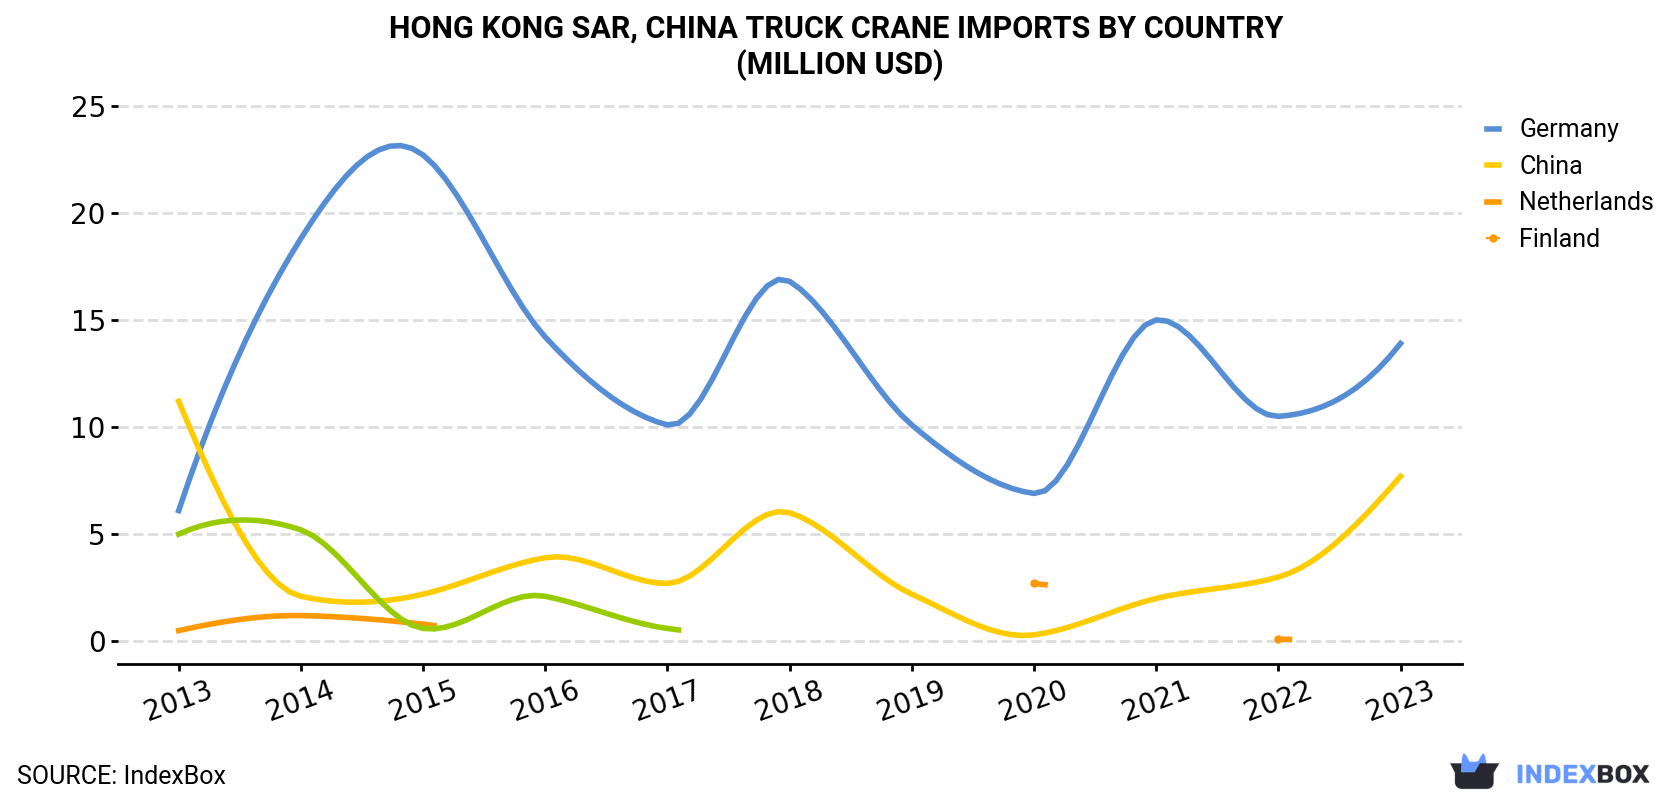 Hong Kong Truck Crane Imports By Country (Million USD)